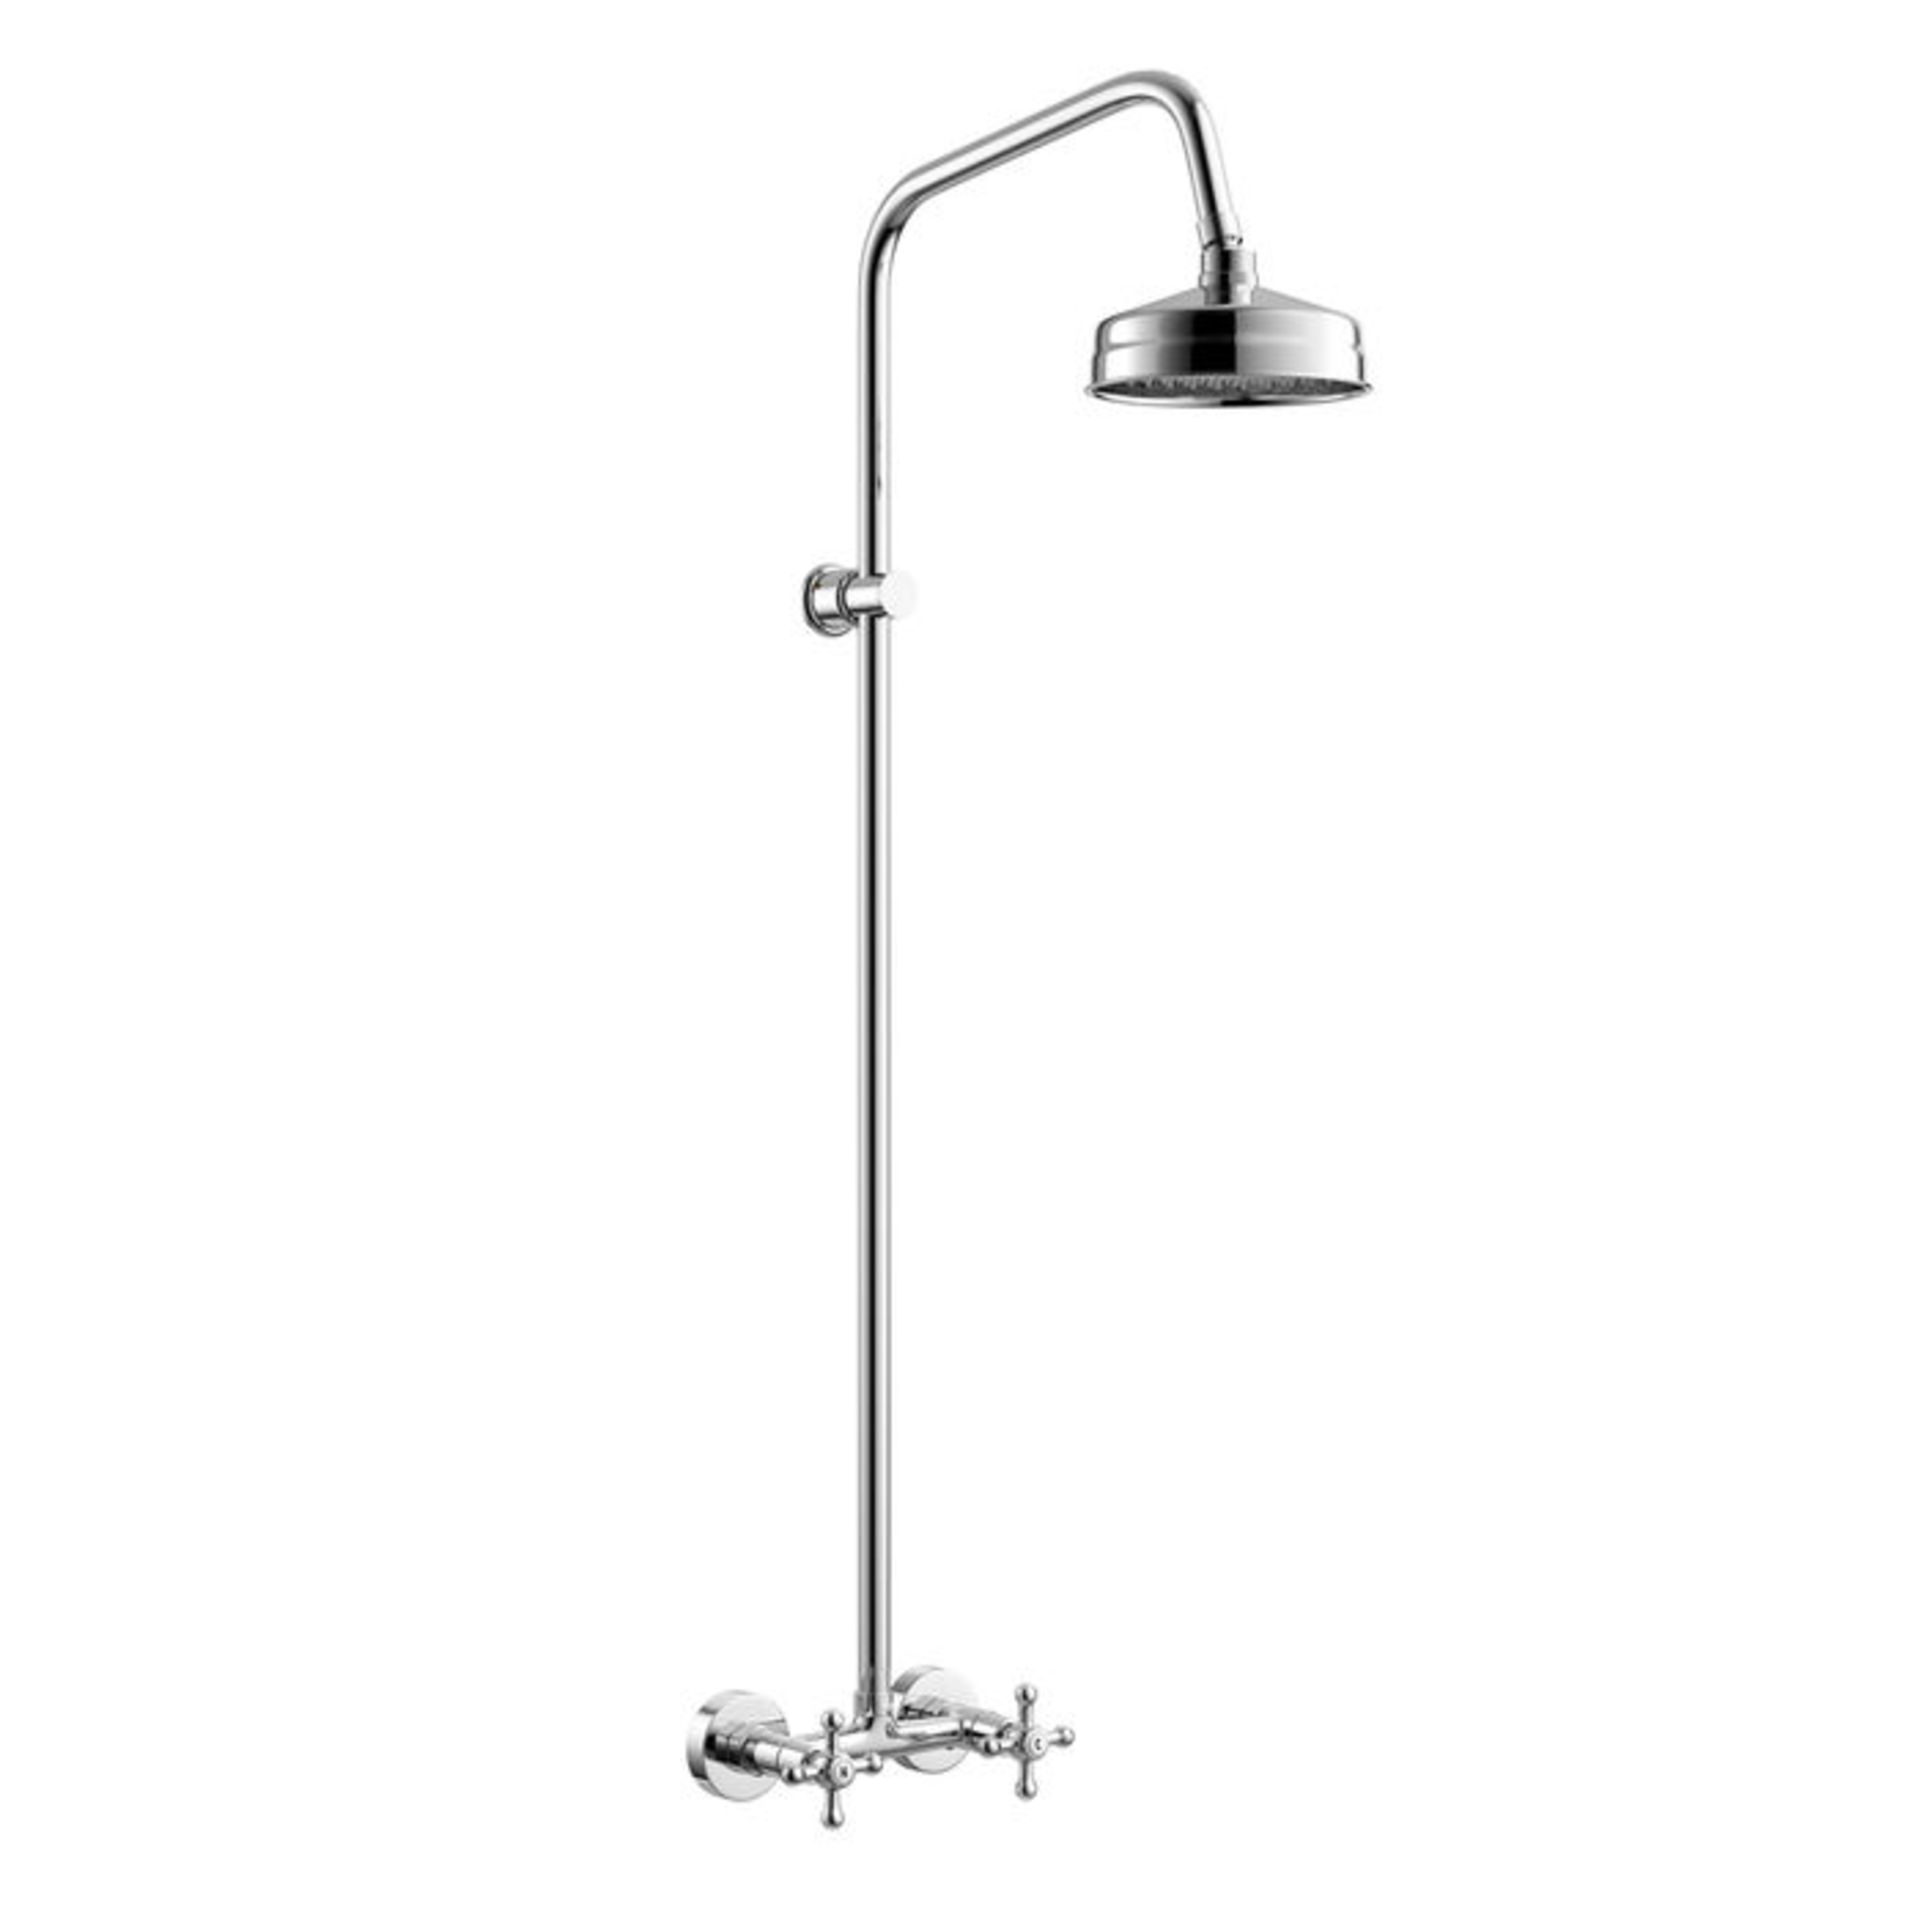 (TS211) Traditional Exposed Shower Medium Head. Exposed design makes for a statement piece - Image 2 of 3